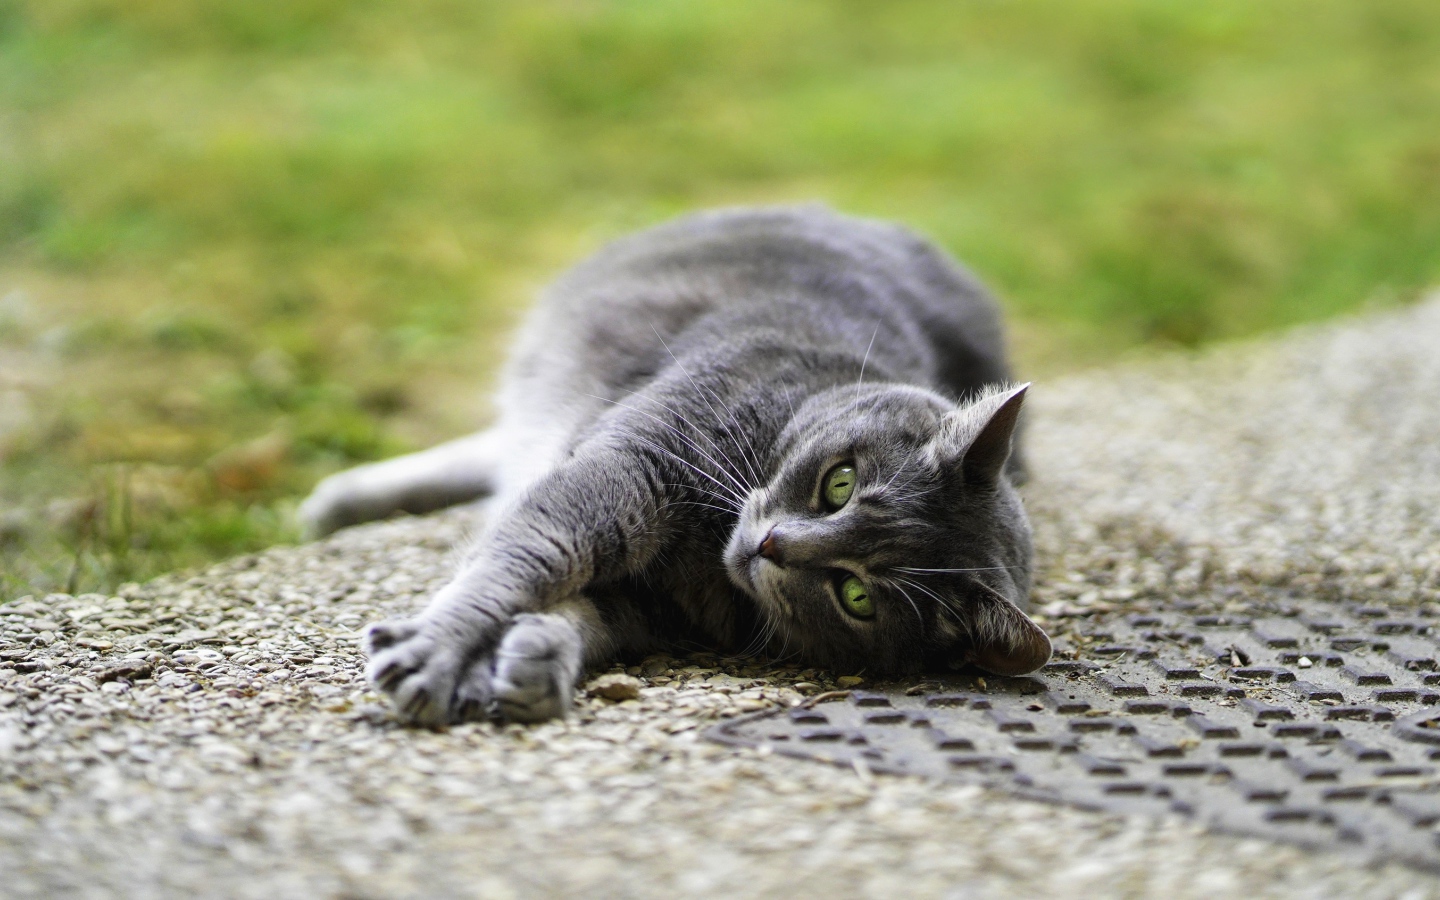 Gray cat lying on the pavement